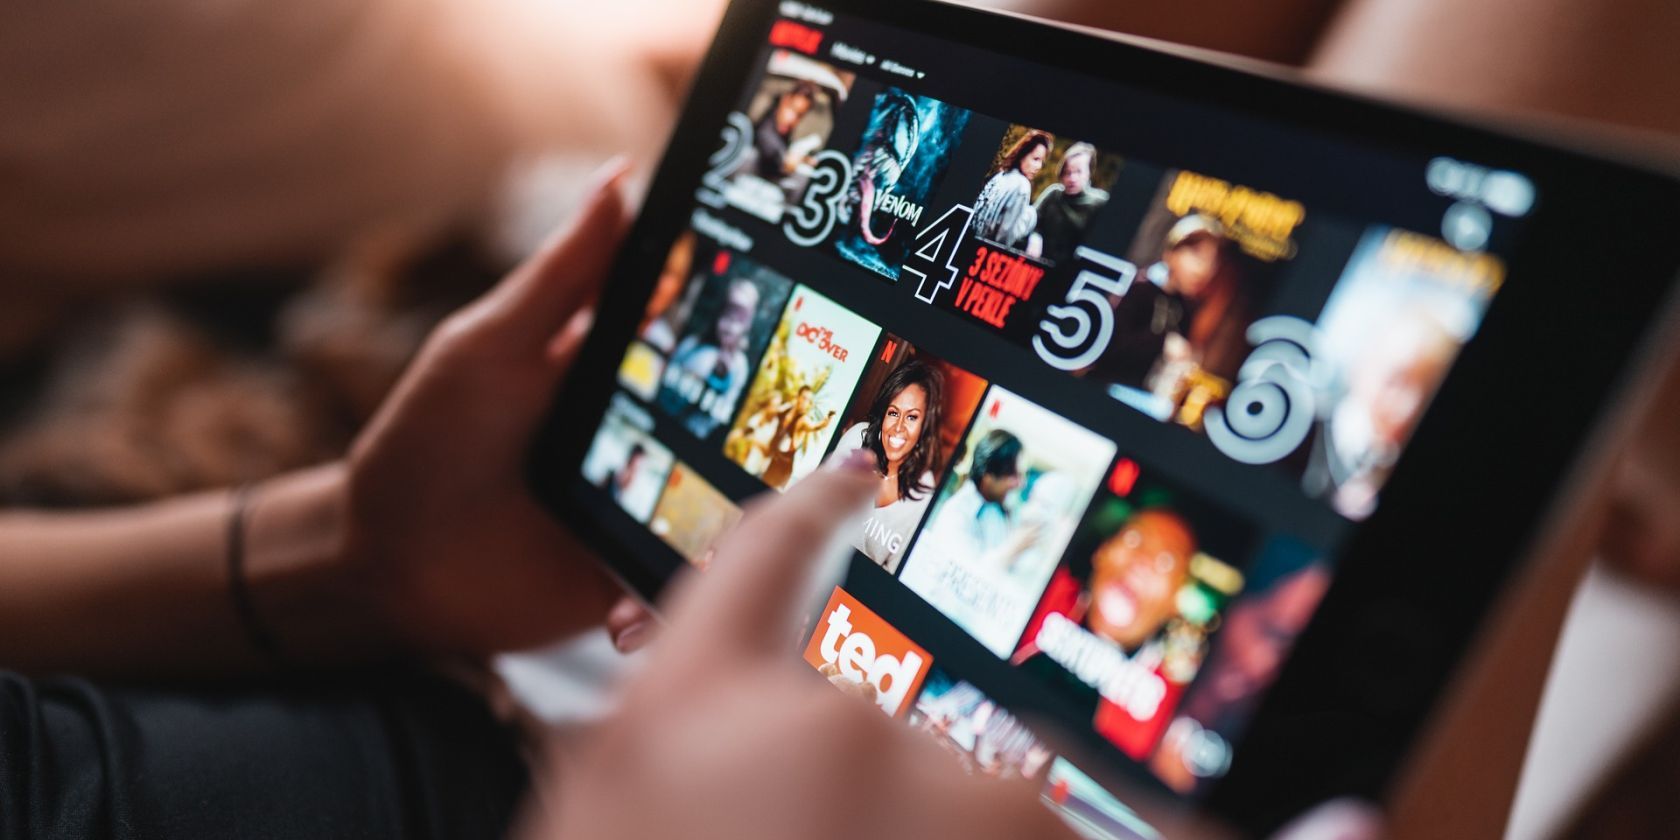 How to Change the Video Quality on Netflix